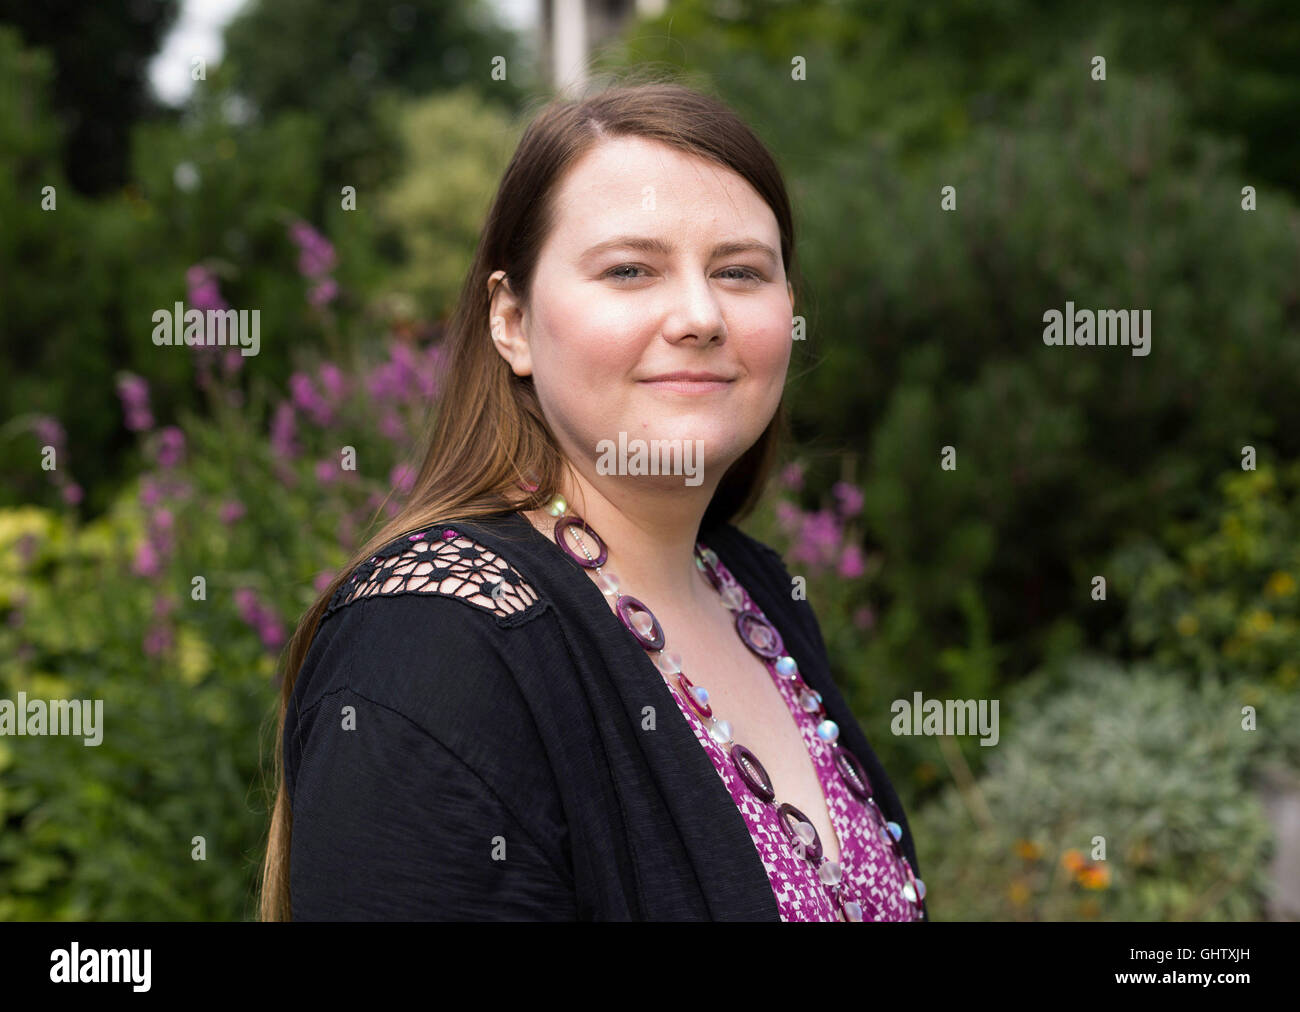 Vienna, Austria. 3rd Aug, 2016. Natascha Kampusch, who was held captive and abused for years, pictured during a dpa interview in the Burggarten park in Vienna, Austria, 3 August 2016. The 28-year-old is set to publish her new book Natascha Kampusch: 10 Jahre Freiheit" (lit. Natascha Kampusch: 10 years of freedom). PHOTO: PETER TRYKAR/DPA/Alamy Live News Stock Photo